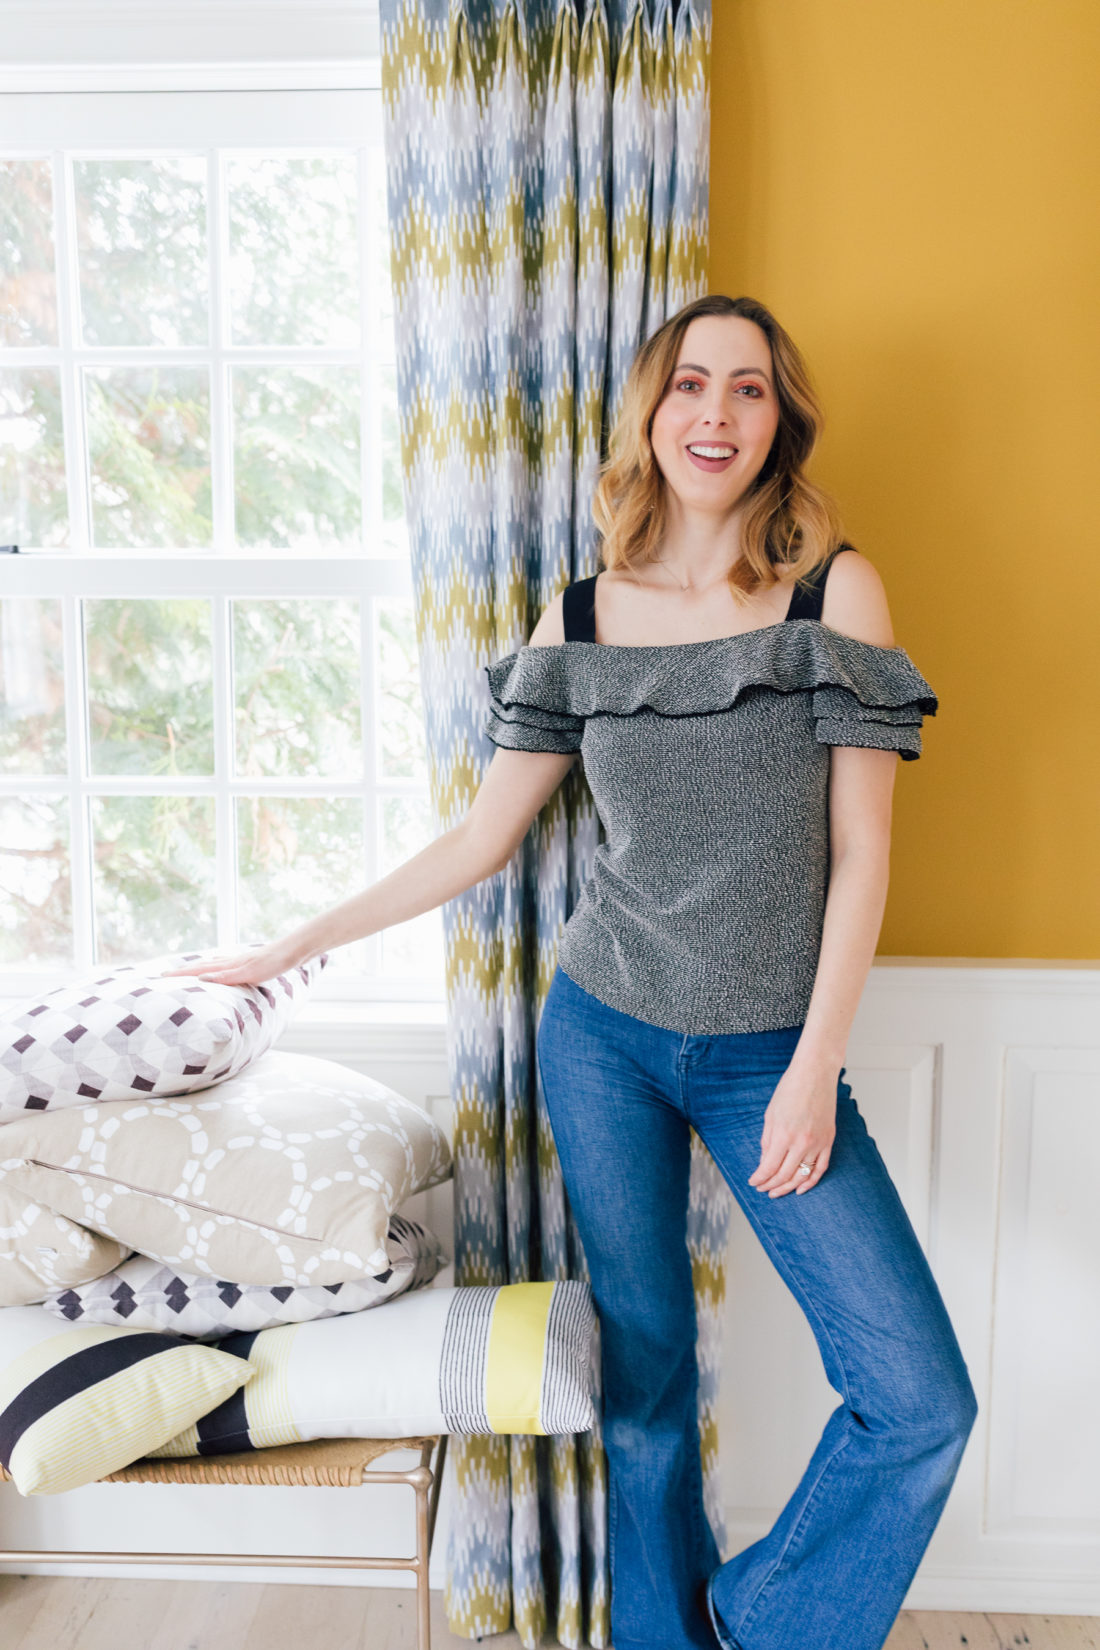 Eva Amurri Martino wears jeans and an off the shoulder top, and stands in the living room of her connecticut home as she prepares to move house